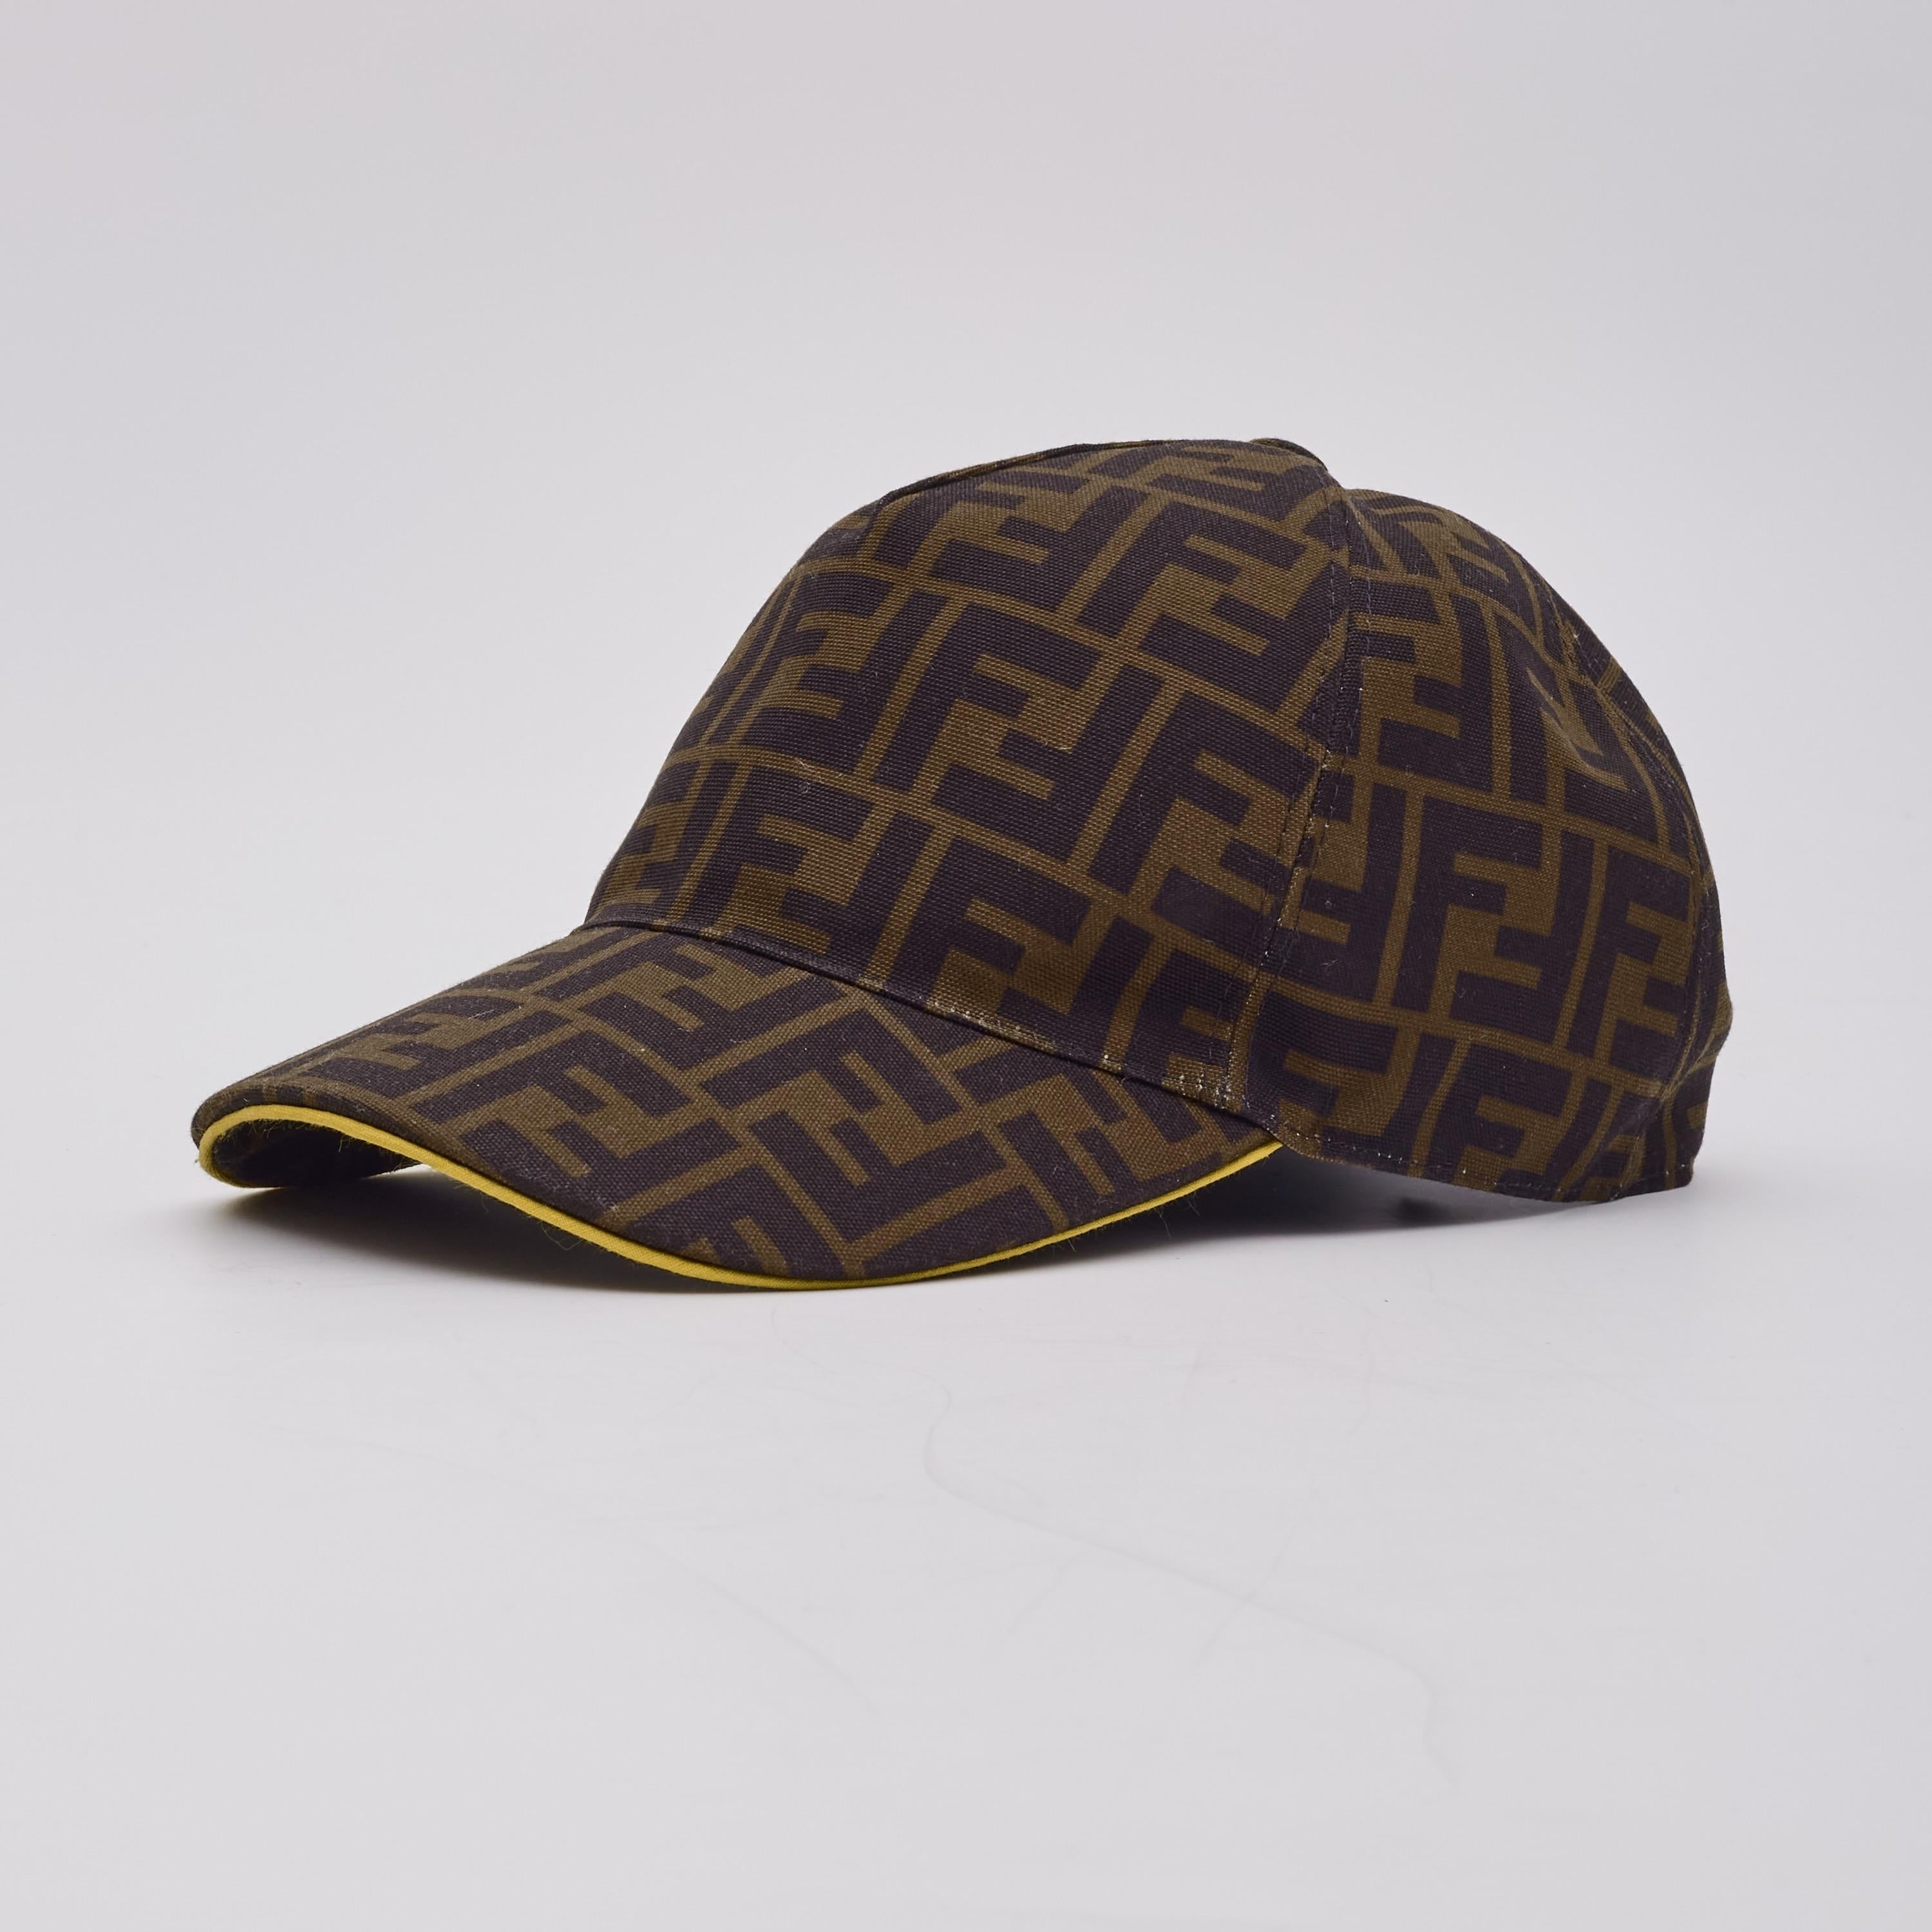 This stylish cap is made of Fendi zucca monogram canvas. The interior is lined with black fabric and the hat features contrasting yellow trim.

Color: tobacco brown with black ff jacquard and yellow trim
Material: 100% polyester
FXQ768